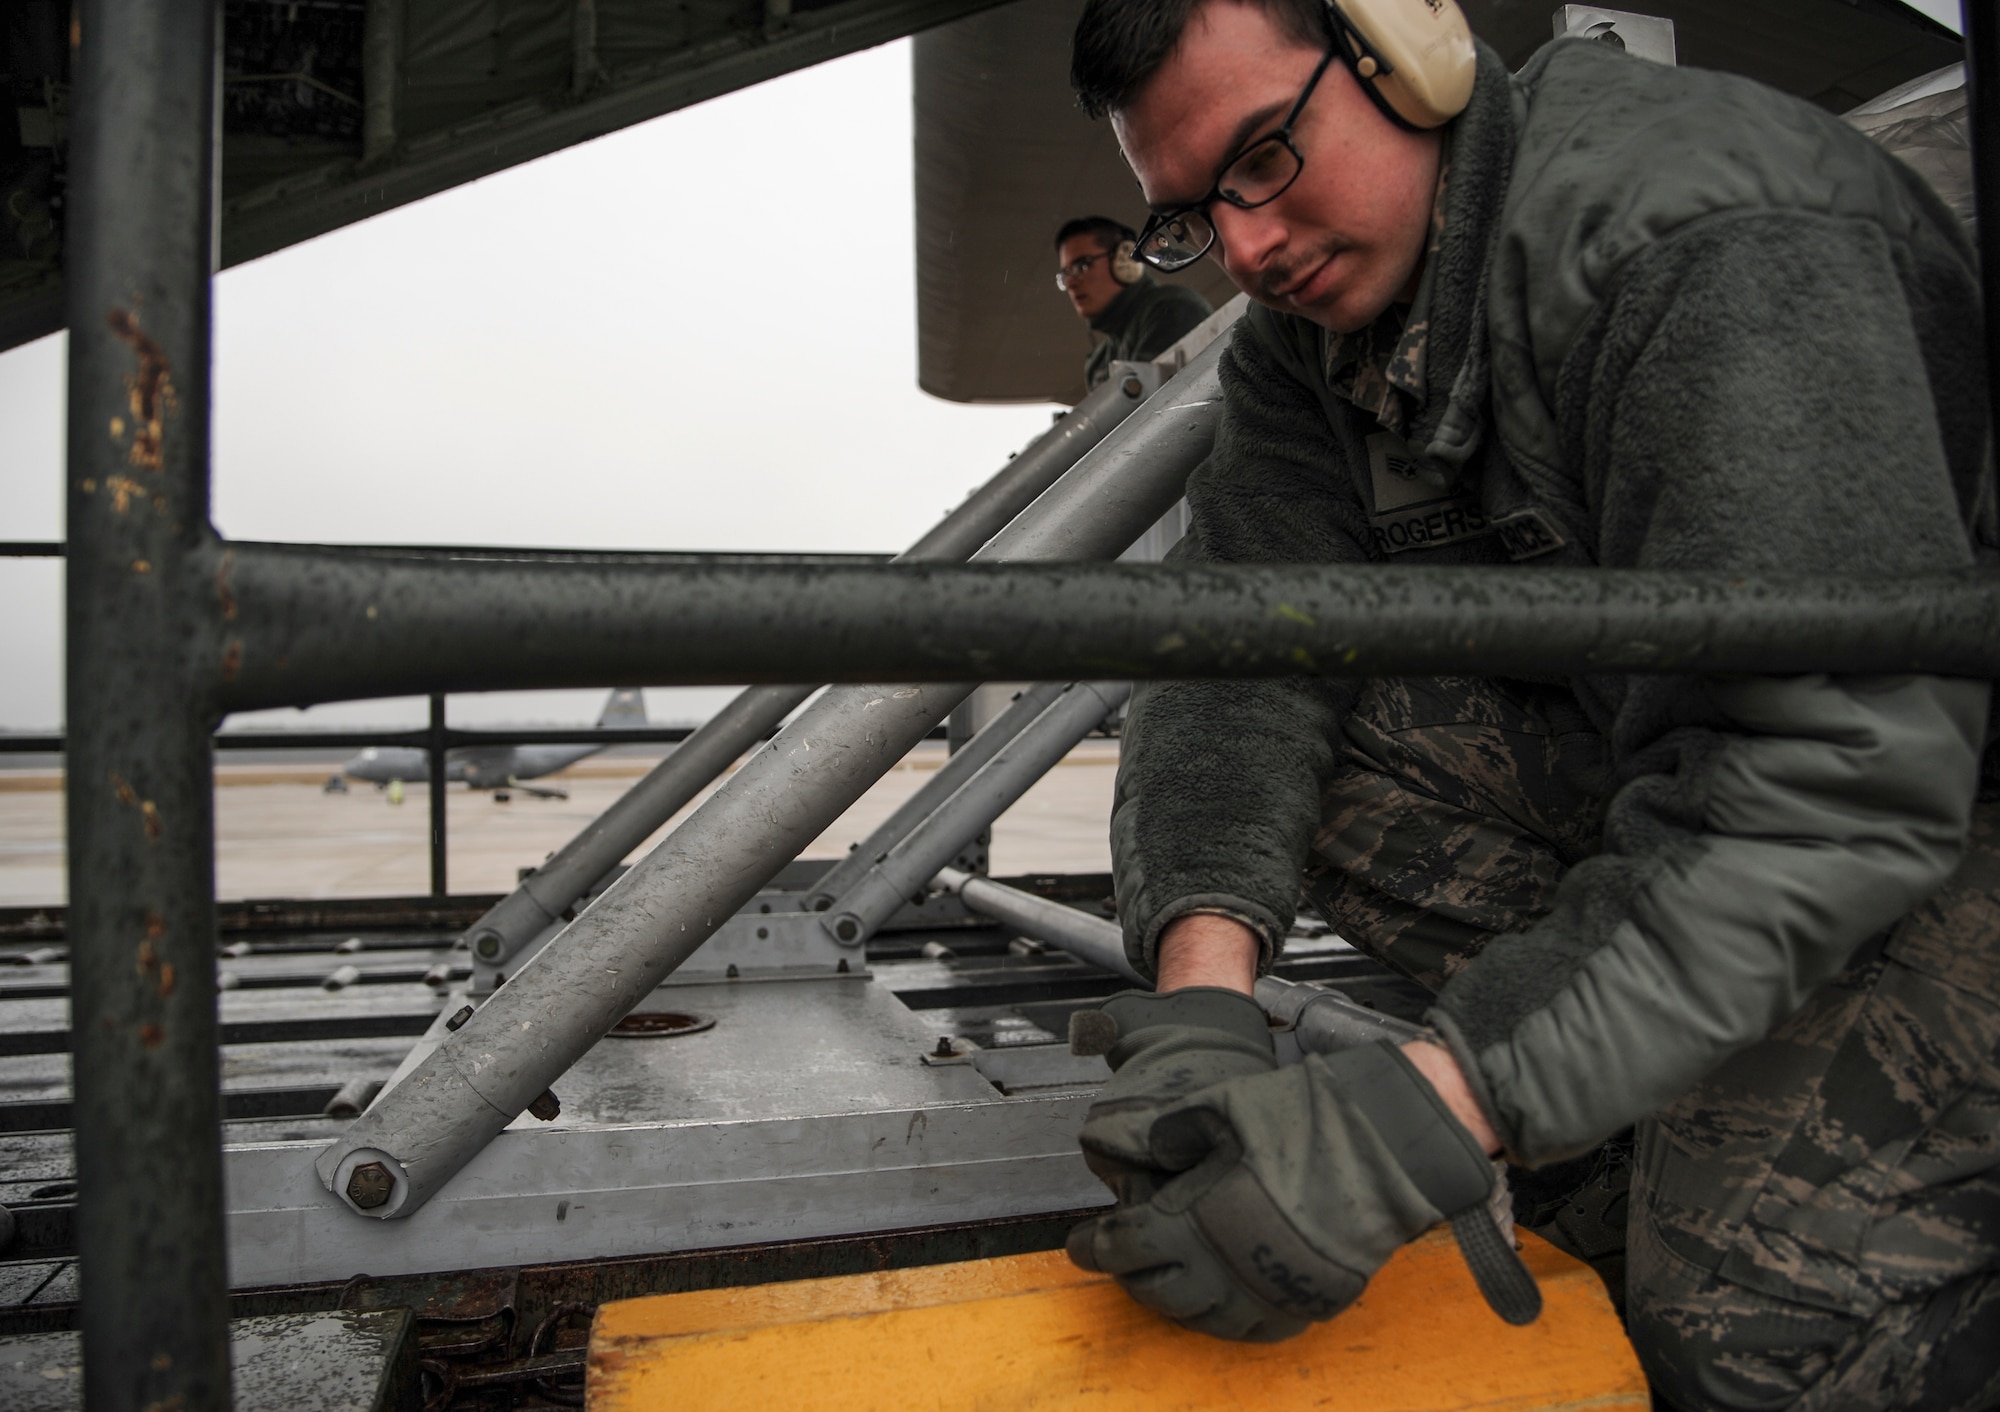 Senior Airman Stephen Rogers, a 19th Logistics Readiness Squadron air transportation specialist, secures a chock March 9, 2015, at Little Rock Air Force Base, Ark. Rogers used the chock to secure a gap between a vehicle and C-130J loading ramp, before transferring cargo. (U.S. Air Force photo by Airman 1st Class Harry Brexel)  